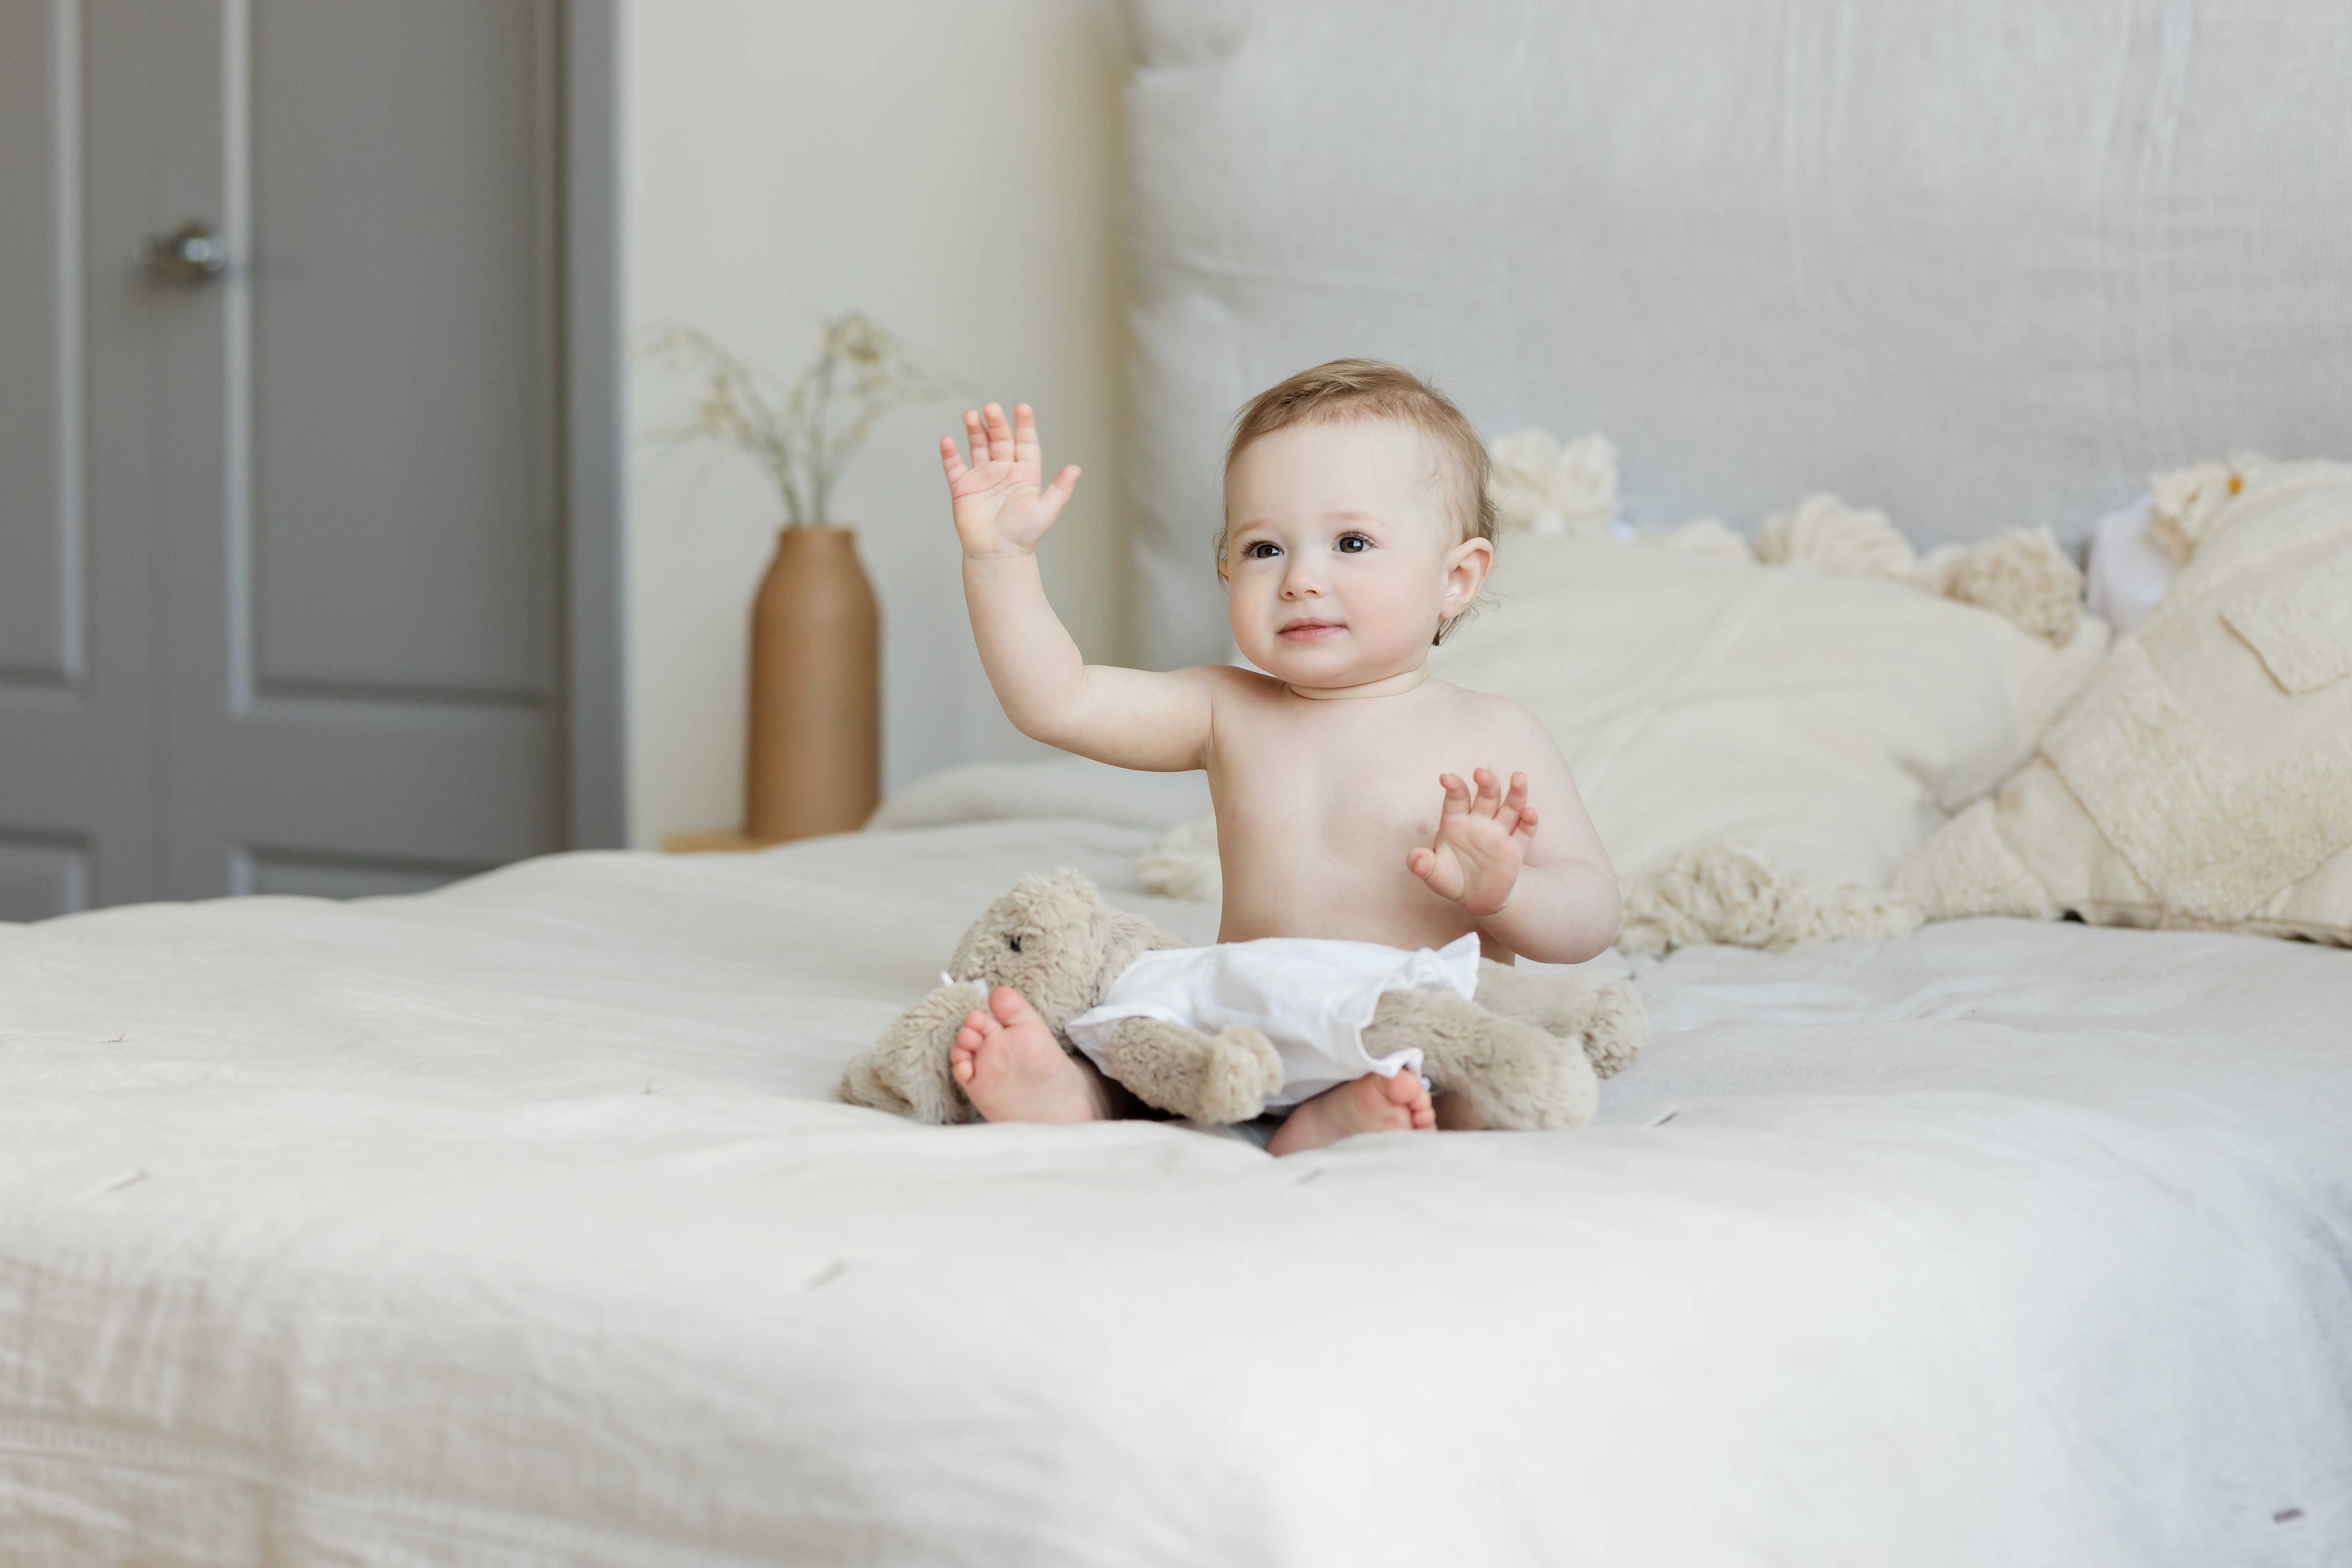 Baby on bed waving